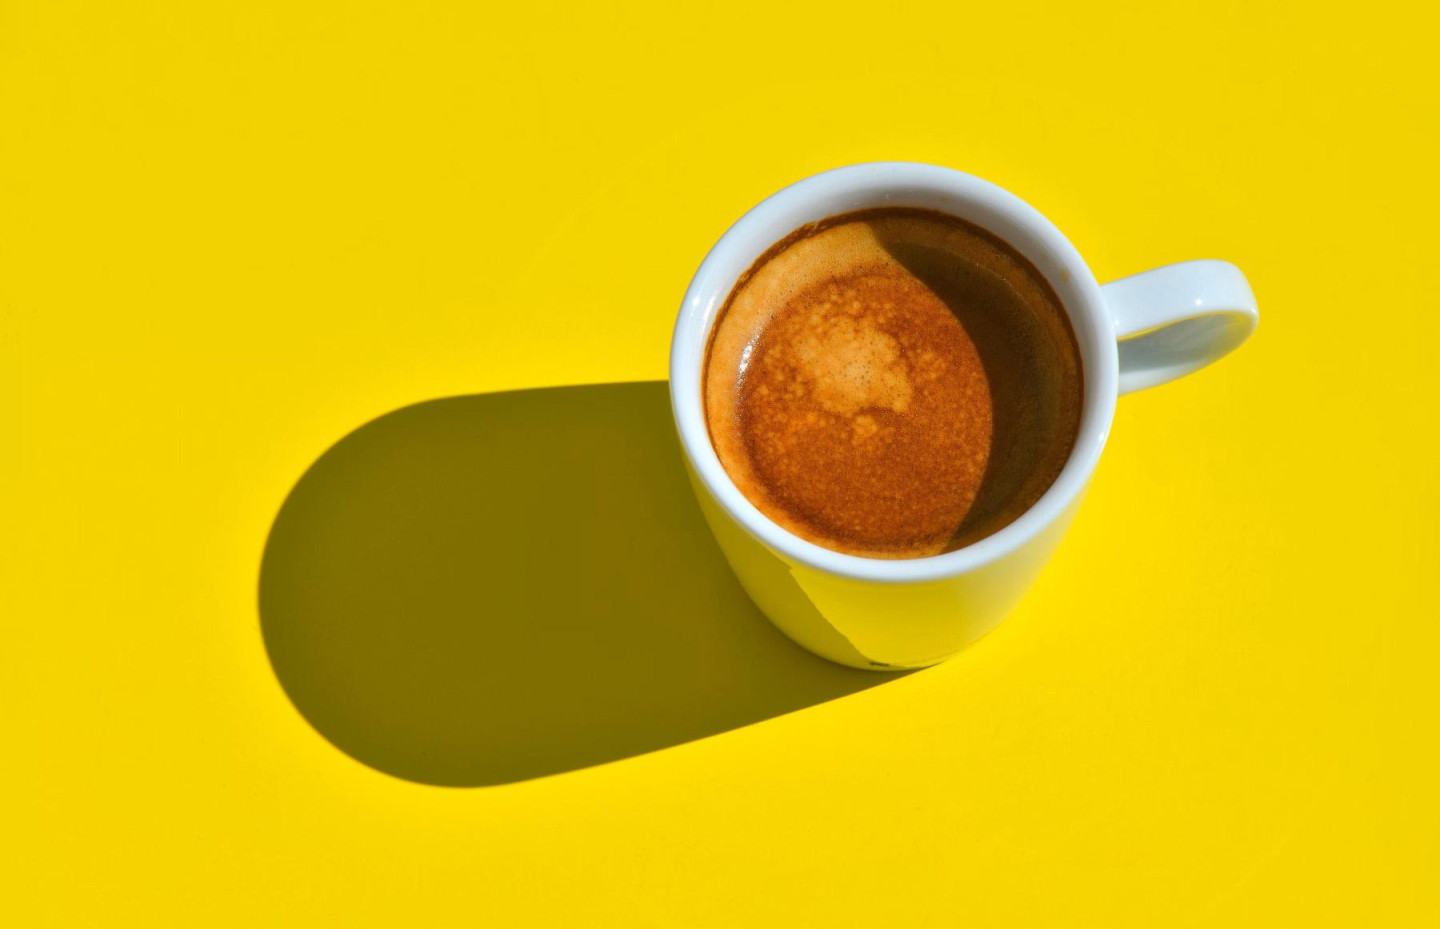 “I’d like decaf, please.”  What is decaf and how do you get it?